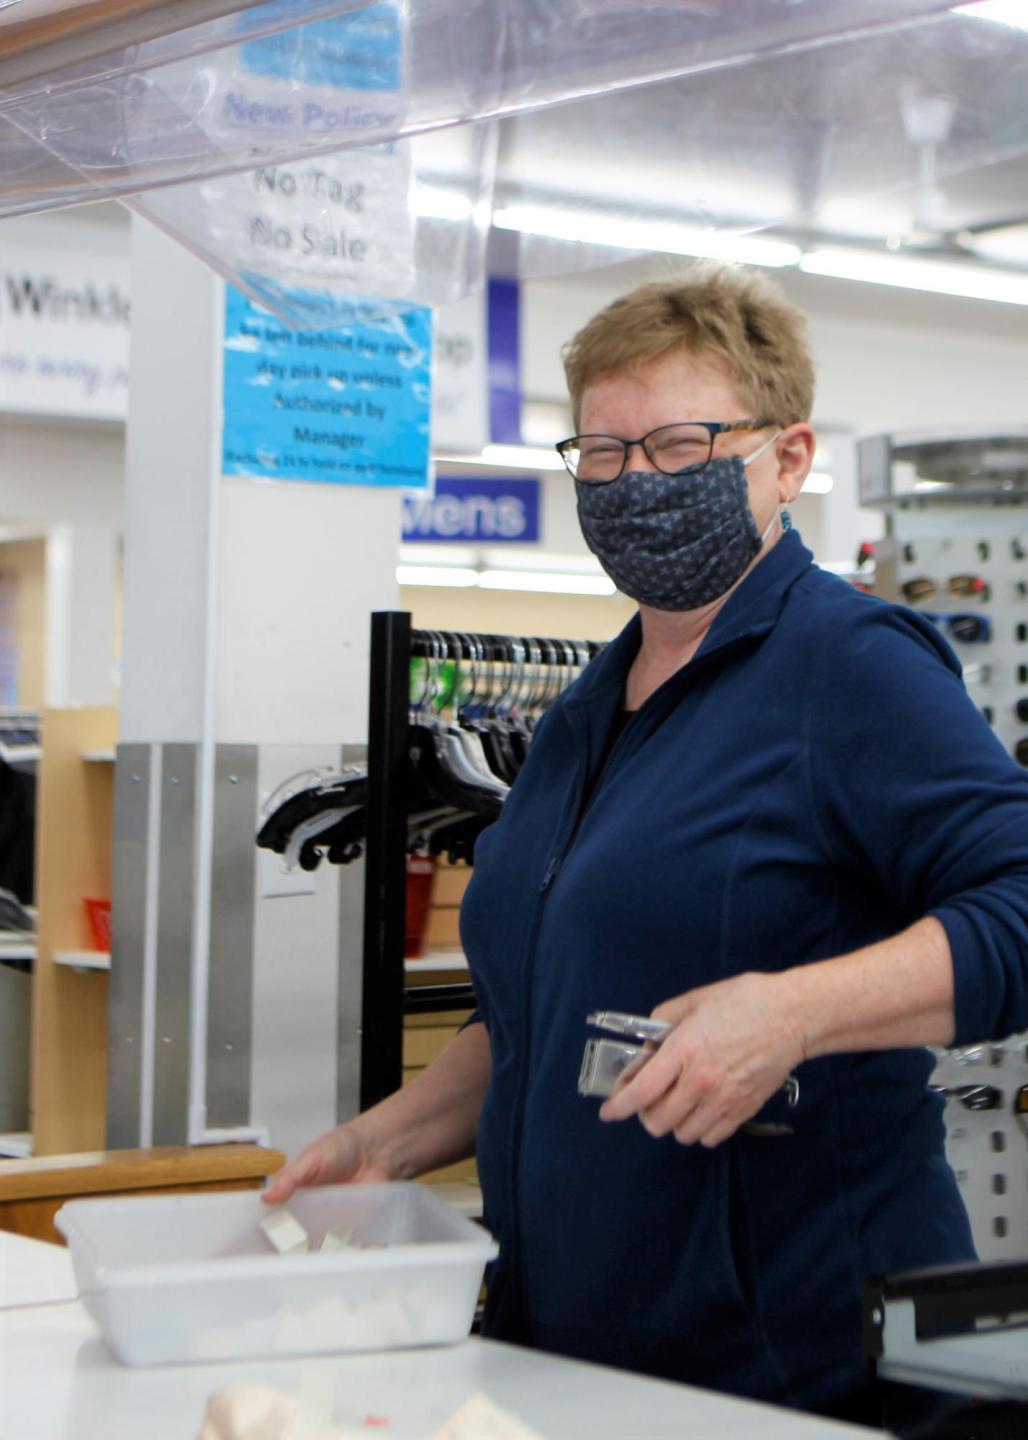 A woman with short hair, glasses and a face mask works at a thrift shop